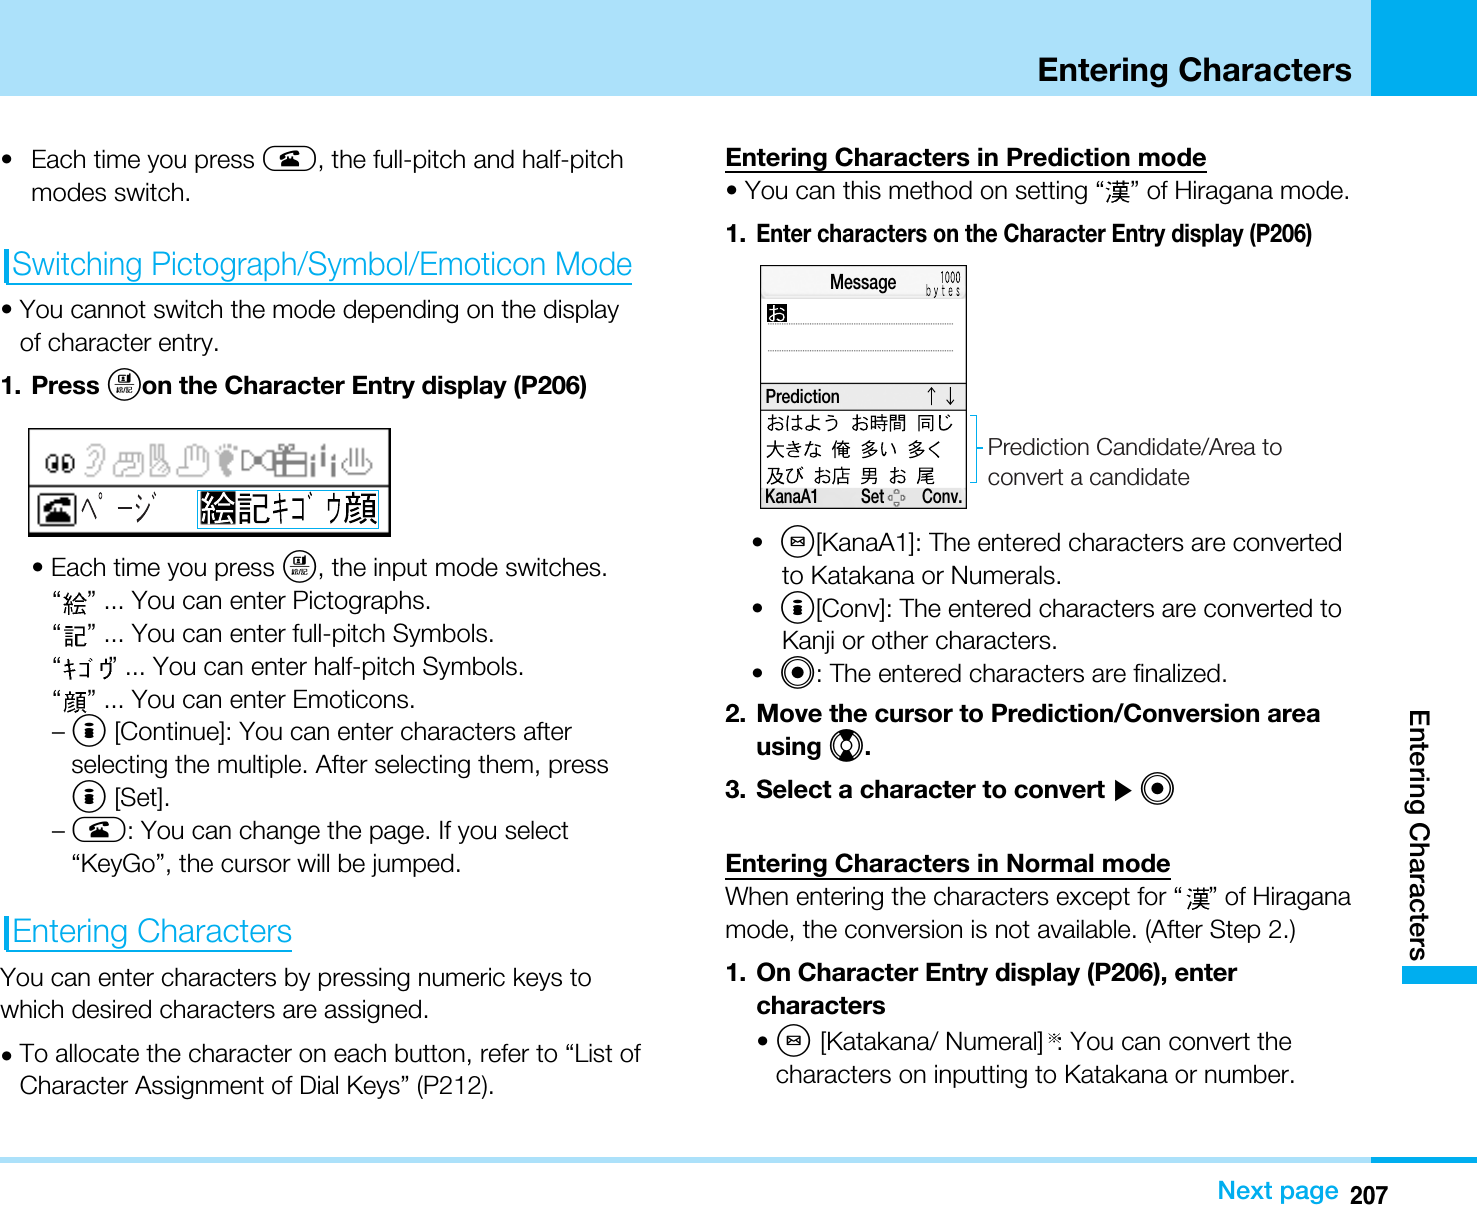 207Entering CharactersEntering CharactersNext page• Each time you press A, the full-pitch and half-pitchmodes switch.Switching Pictograph/Symbol/Emoticon Mode• You cannot switch the mode depending on the displayof character entry.1. Press Ton the Character Entry display (P206)• Each time you press T, the input mode switches.“” ... You can enter Pictographs.“” ... You can enter full-pitch Symbols.“” ... You can enter half-pitch Symbols.“” ... You can enter Emoticons.–I[Continue]: You can enter characters afterselecting the multiple. After selecting them, pressI[Set].–A: You can change the page. If you select“KeyGo”, the cursor will be jumped.Entering CharactersYou can enter characters by pressing numeric keys towhich desired characters are assigned.•To allocate the character on each button, refer to “List ofCharacter Assignment of Dial Keys” (P212).Entering Characters in Prediction mode• You can this method on setting “ ” of Hiragana mode. 1.Enter characters on the Character Entry display (P206)•M[KanaA1]: The entered characters are convertedto Katakana or Numerals.•I[Conv]: The entered characters are converted toKanji or other characters.•C: The entered characters are finalized.2. Move the cursor to Prediction/Conversion areausing H.3. Select a character to convert ]CEntering Characters in Normal modeWhen entering the characters except for “ ” of Hiraganamode, the conversion is not available. (After Step 2.)1. On Character Entry display (P206), entercharacters•M[Katakana/ Numeral] : You can convert thecharacters on inputting to Katakana or number.KanaA1          Set         Conv.MessagePredictionPrediction Candidate/Area to convert a candidate